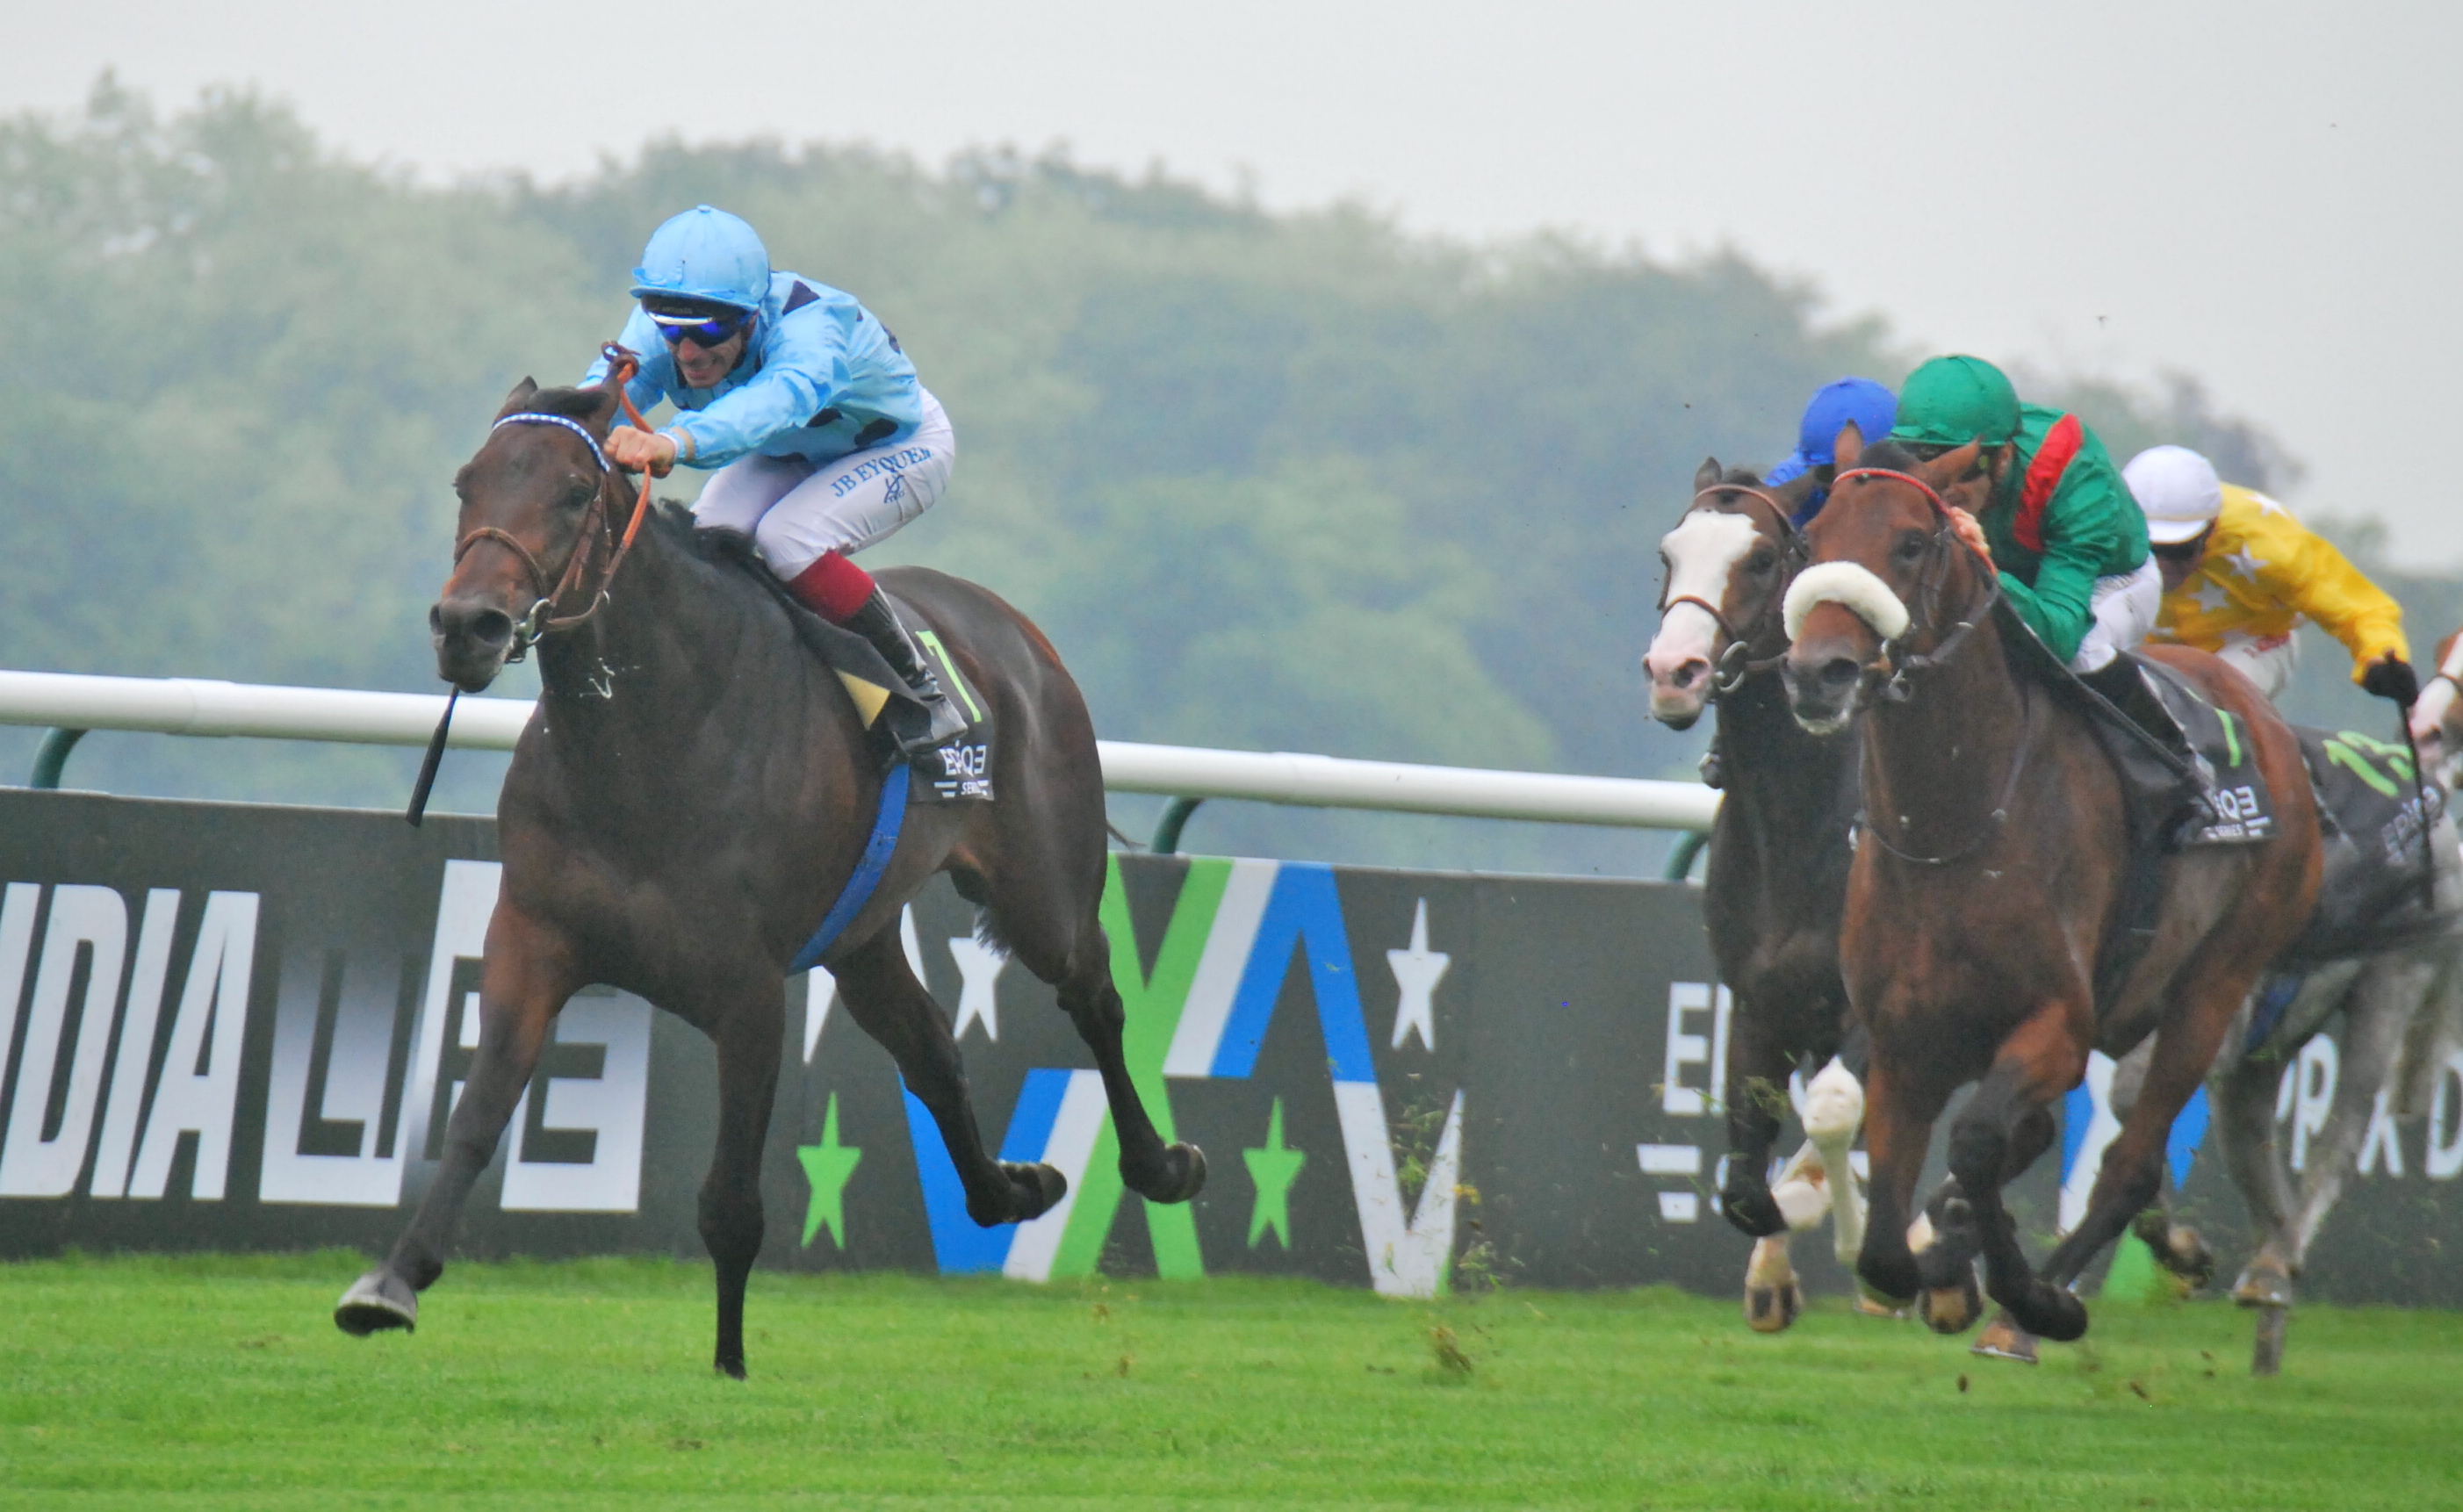 Almanzor, bought as a yearling at the Arqana August sale in 2014, wins the Prix du Jockey Club. He also landed the British and Irish Champion Stakes. Photo: John Gilmore